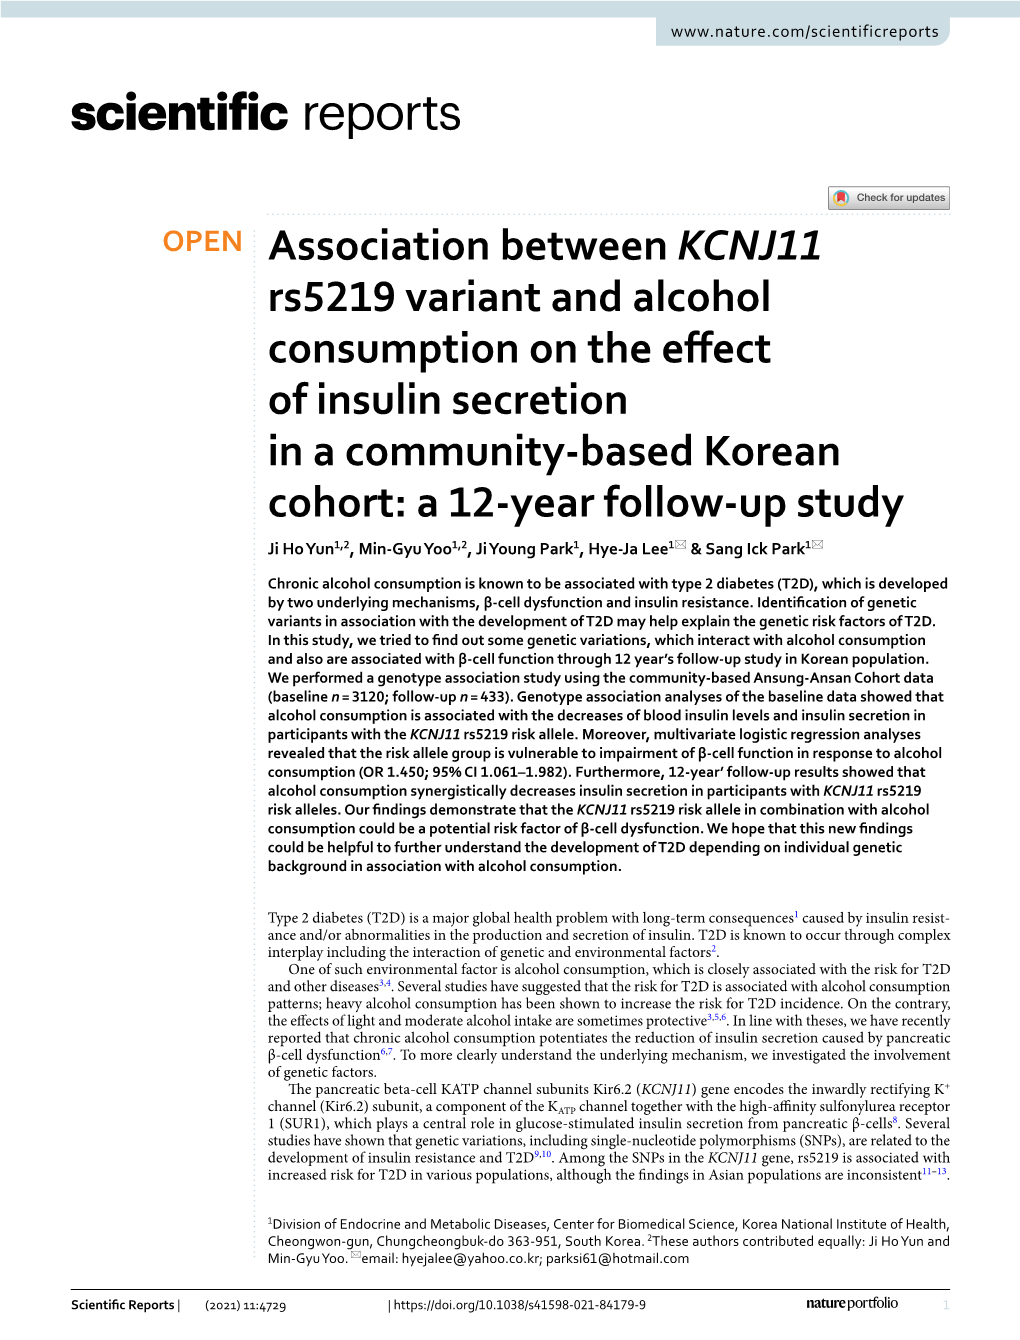 Association Between KCNJ11 Rs5219 Variant and Alcohol Consumption On